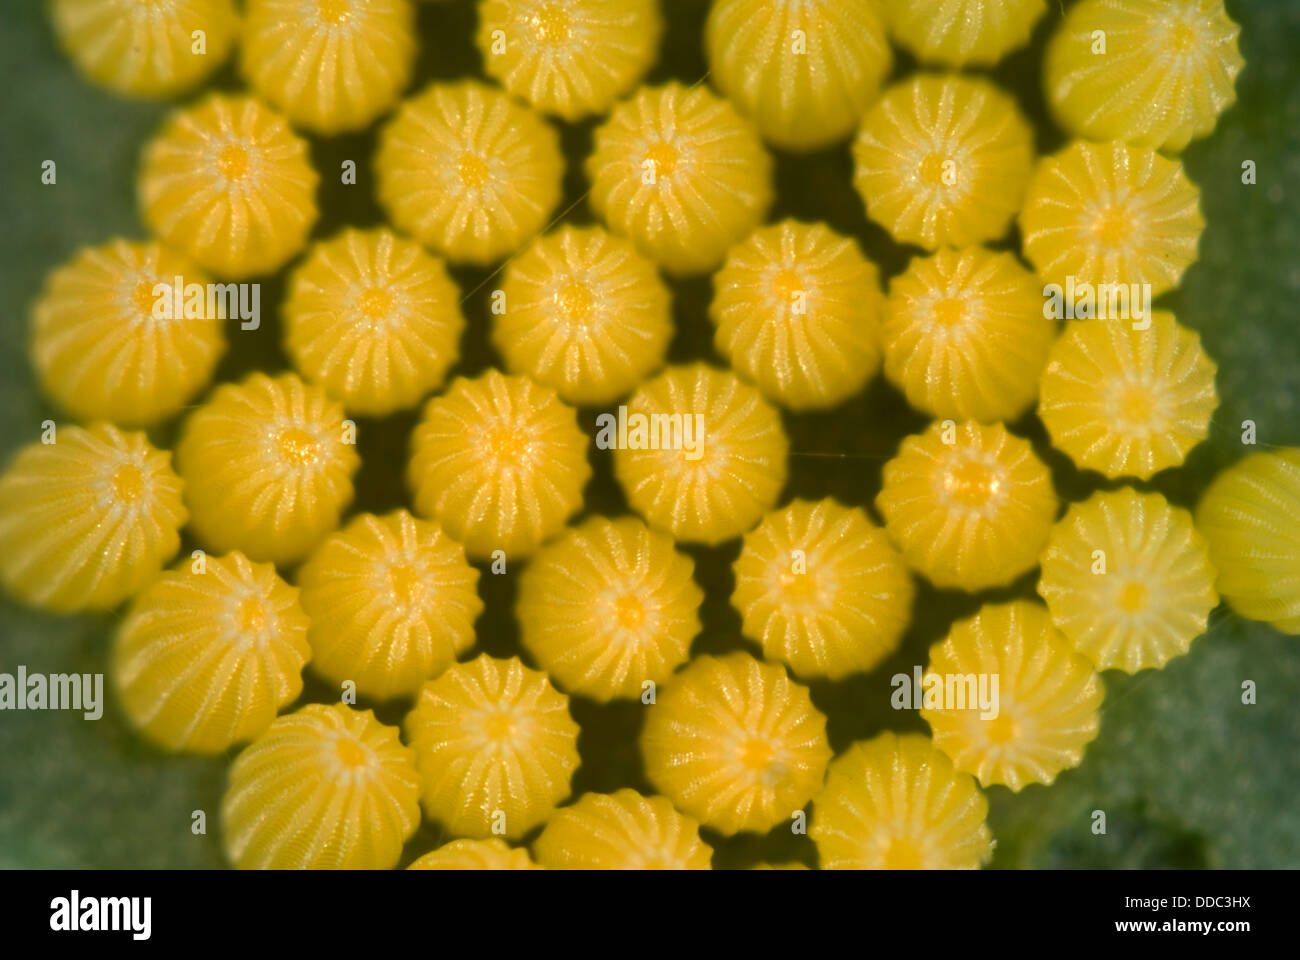 Eggs of the cabbage or large white butterfly, Pieris brassicae, Stock Photo